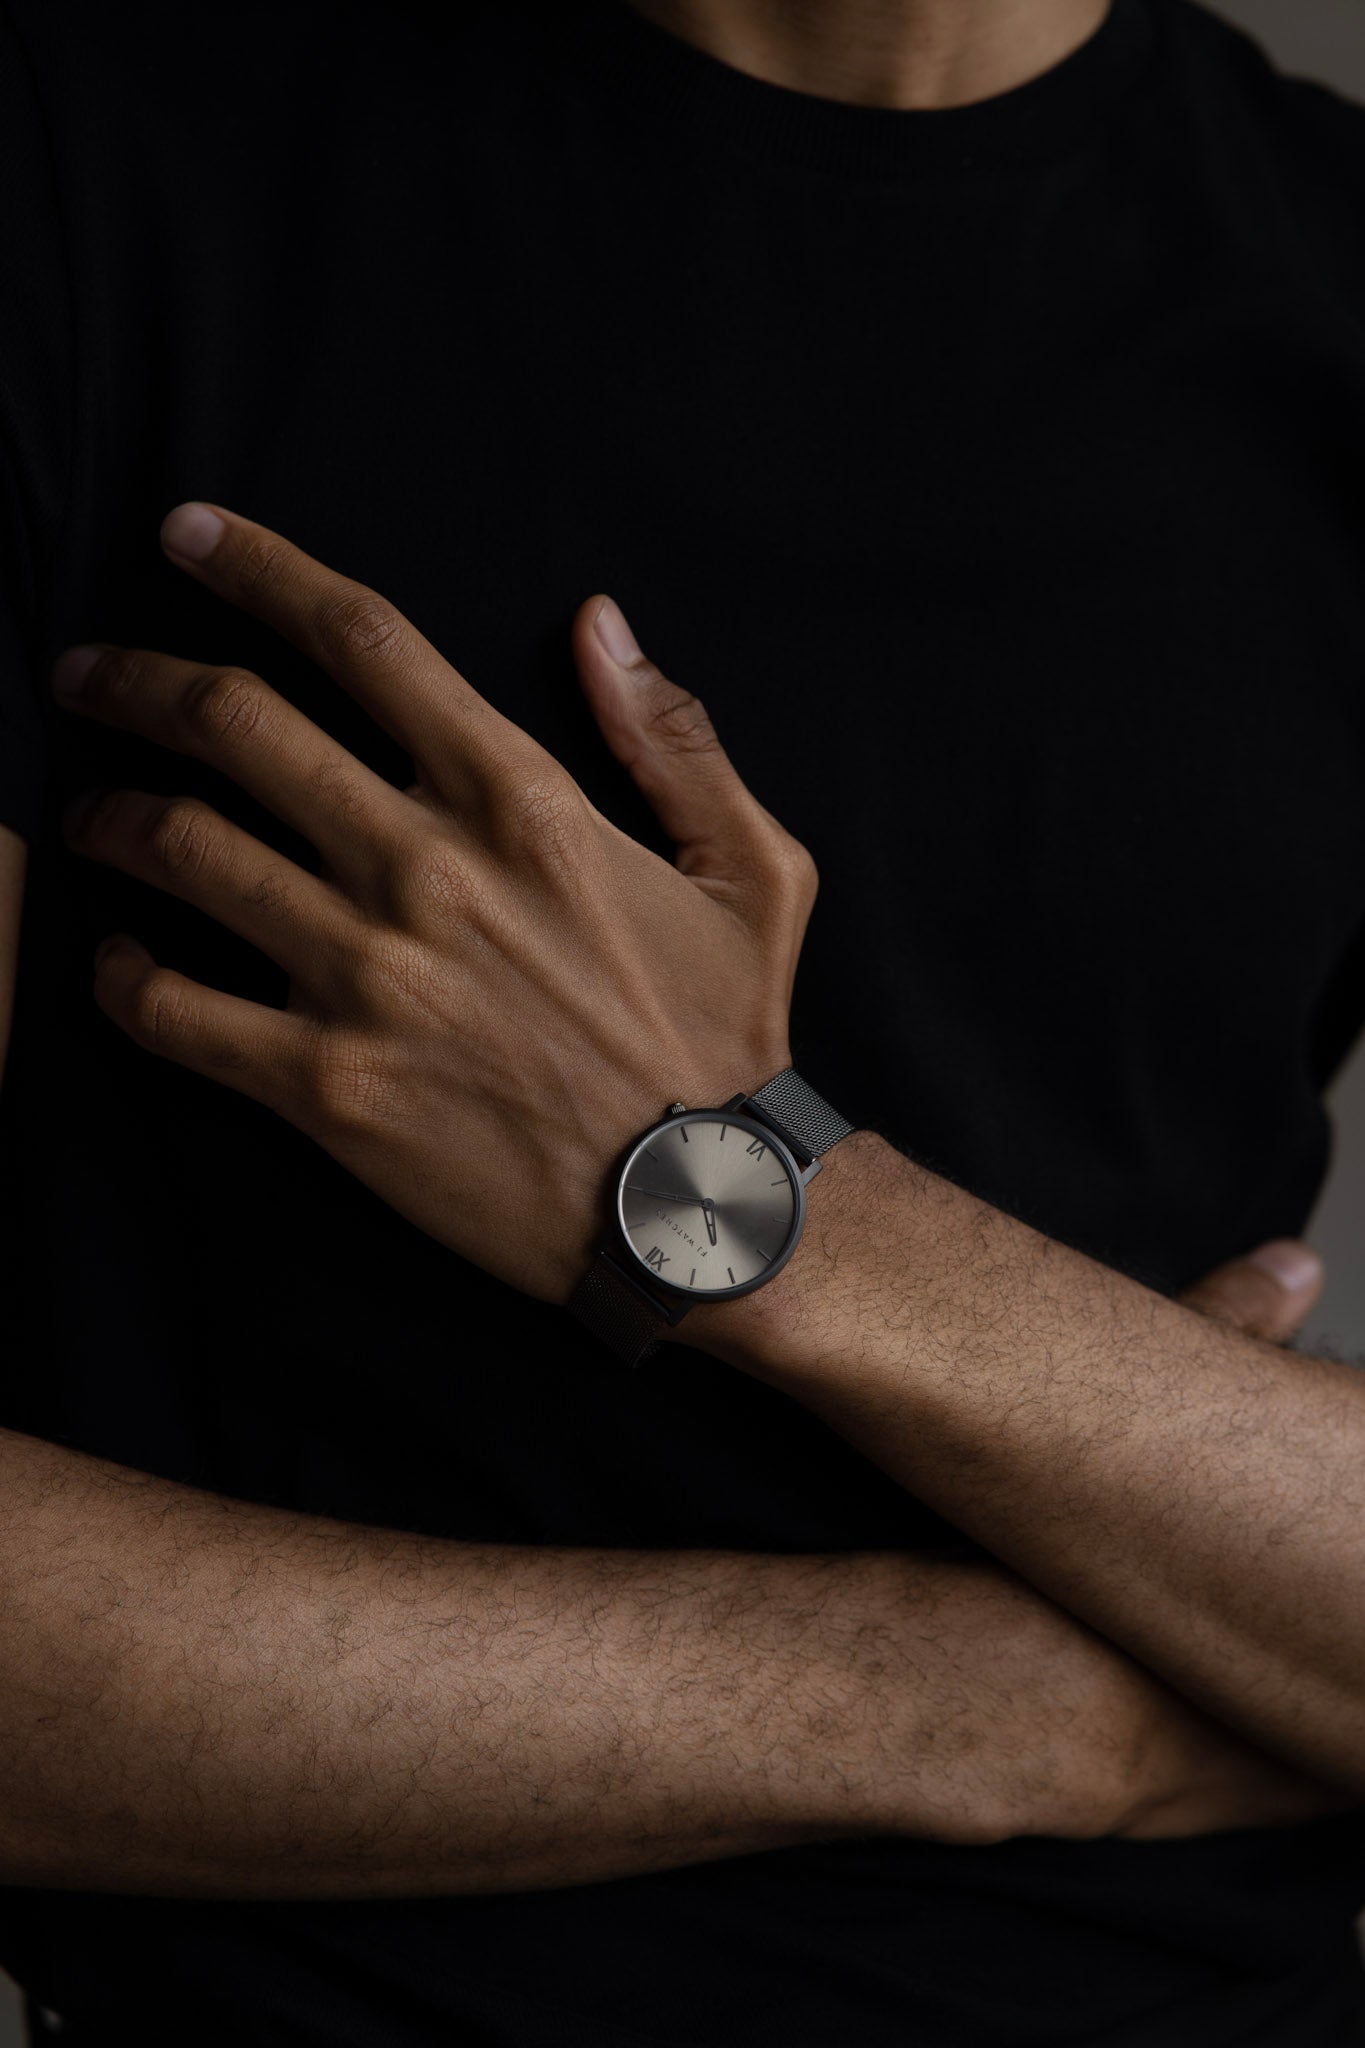 Discover Grey Moon, a Five Jwlry men's watch with a 42mm all grey. This one comes with a grey mesh bracelet.